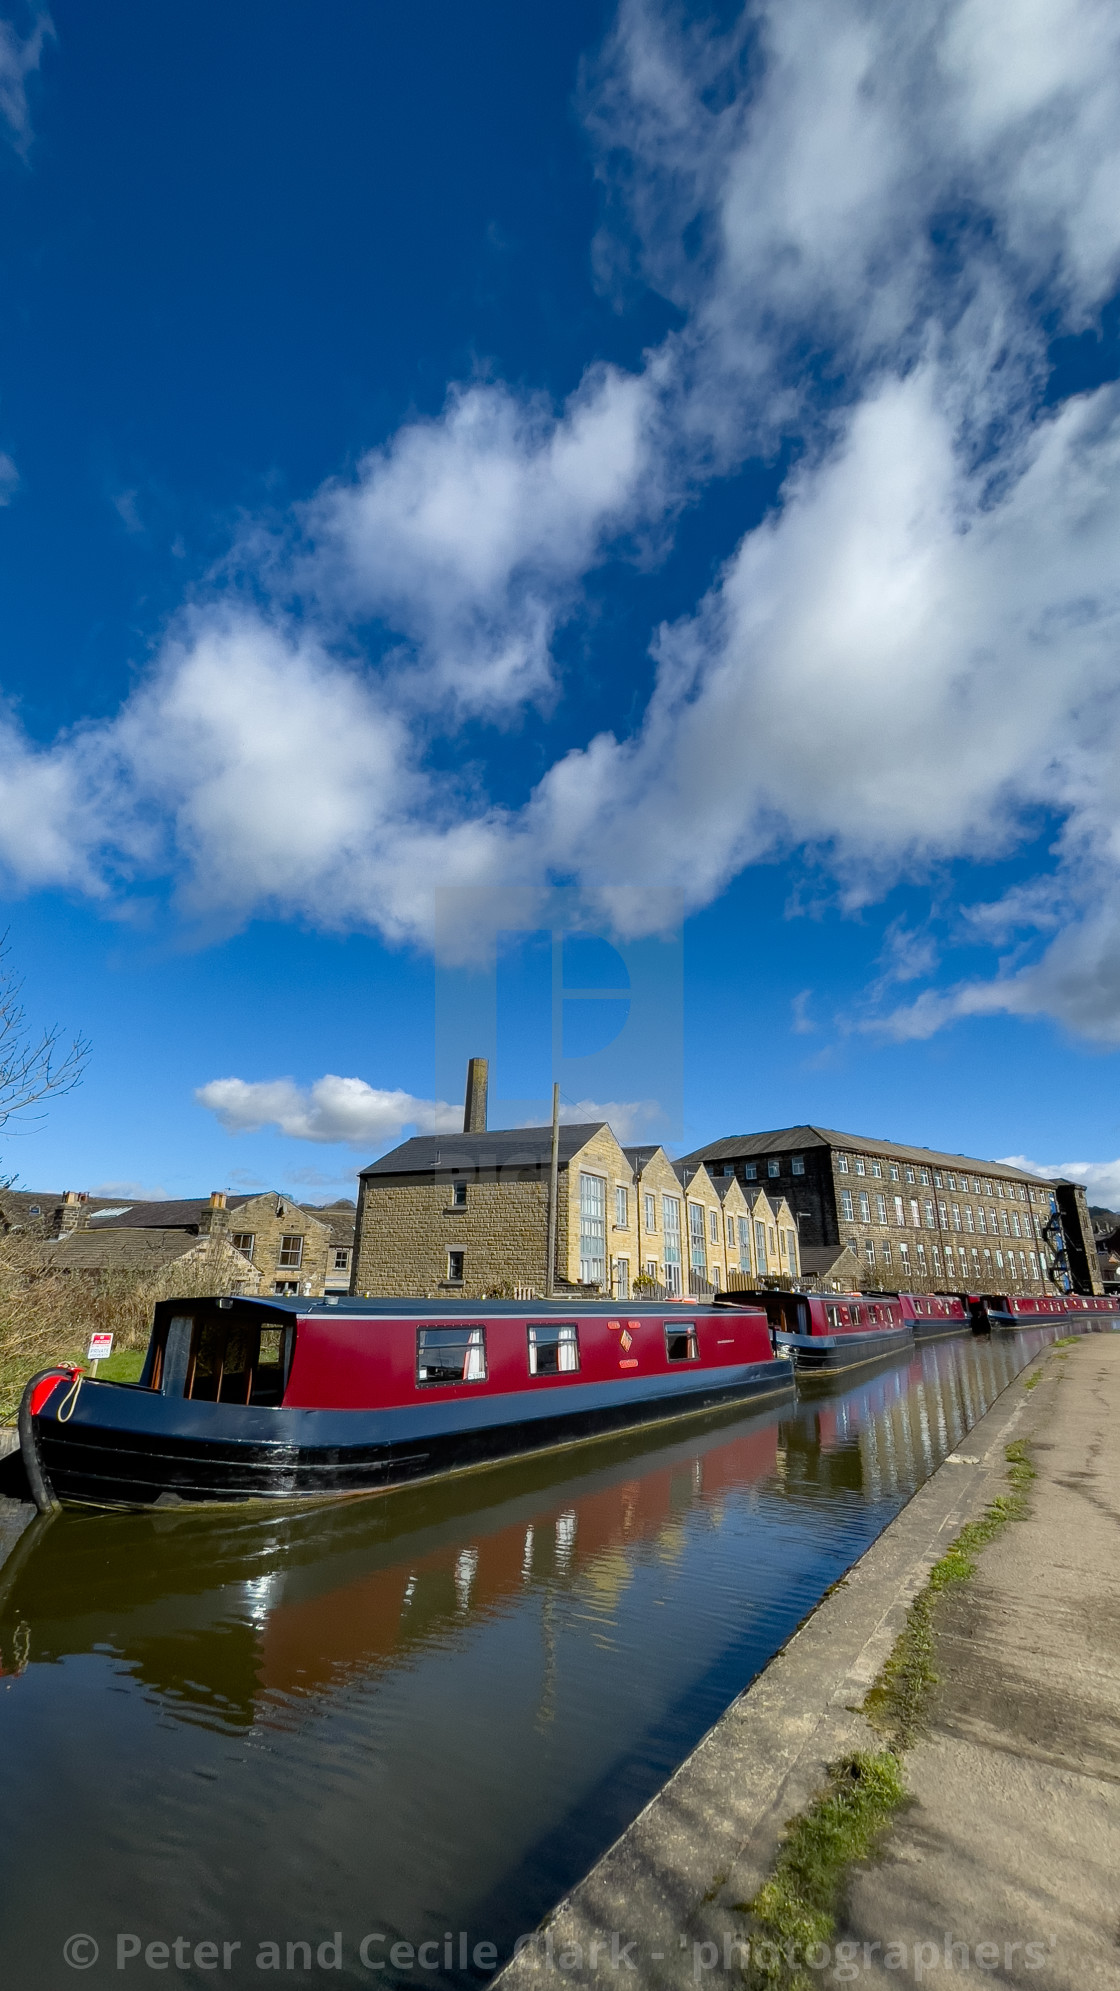 "Holiday Narrowboat/Barge Moored on the Leeds and Liverpool Canal at Silsden (Cobbydale) Yorkshire, England," stock image